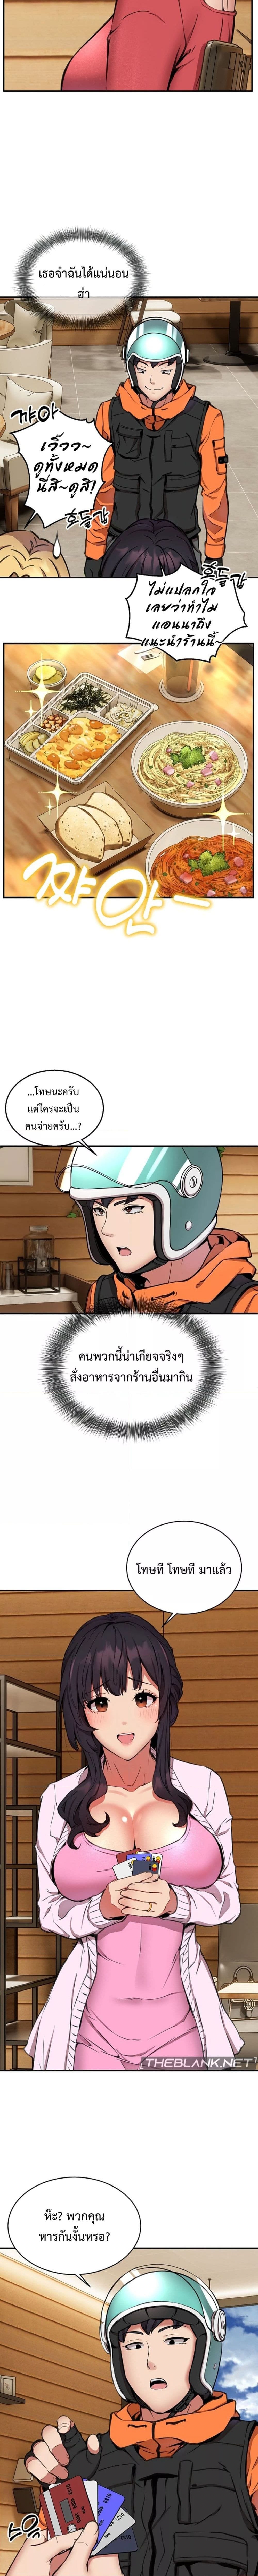 Driver in the New City ตอนที่ 7 ภาพ 9